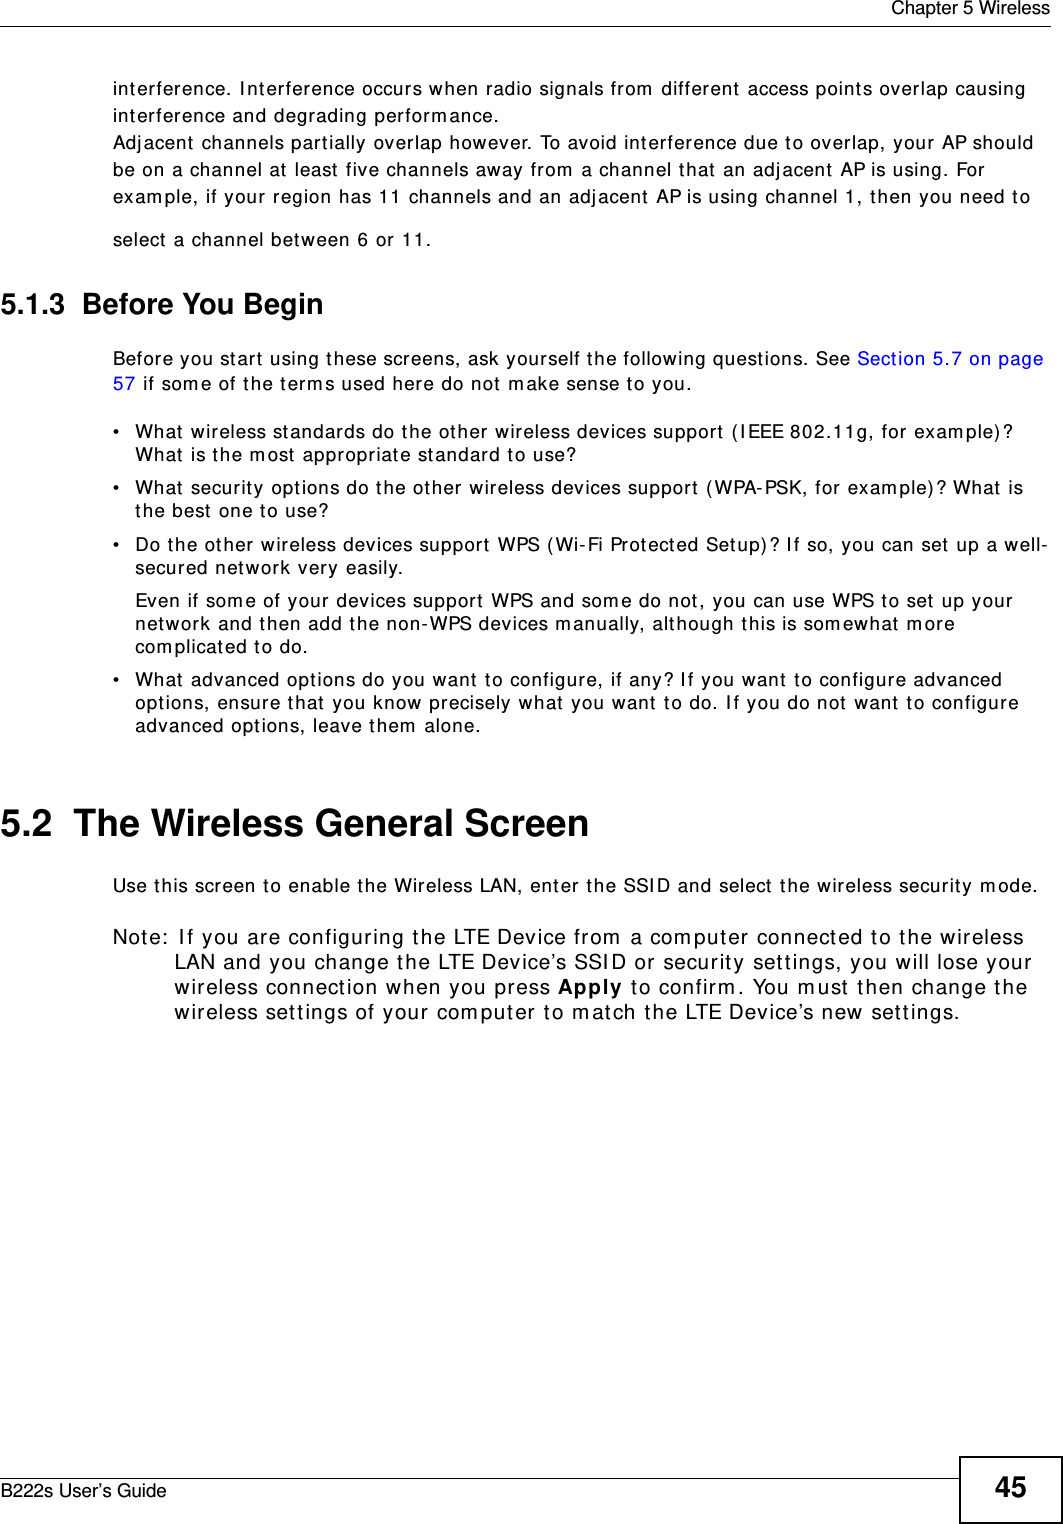  Chapter 5 WirelessB222s User’s Guide 45int erference. I nt erference occurs when radio signals from  different  access point s overlap causingint erference and degrading perform ance.Adj acent channels part ially overlap however. To avoid interference due to overlap, your AP shouldbe on a channel at least five channels away from  a channel t hat  an adj acent AP is using. Forexam ple, if your region has 11 channels and an adj acent AP is using channel 1, t hen you need t oselect  a channel bet ween 6 or 11.5.1.3  Before You BeginBefore you start  using t hese screens, ask yourself t he following quest ions. See Section 5.7 on page 57 if som e of t he t erm s used here do not m ake sense to you.• What  wireless st andards do the ot her wireless devices support  ( I EEE 802.11g, for exam ple)? What  is t he m ost  appropriat e standard to use?• What  security options do t he ot her wireless devices support  ( WPA-PSK, for exam ple) ? What  is the best one t o use?• Do t he ot her wireless devices support  WPS ( Wi-Fi Prot ected Set up) ? I f so, you can set up a well-secured network very easily. Even if som e of your devices support WPS and som e do not , you can use WPS t o set up your network and t hen add t he non-WPS devices m anually, although this is som ewhat  m ore com plicated to do.• What advanced opt ions do you want  t o configure, if any? I f you want  t o configure advanced options, ensure t hat  you know precisely what  you want  t o do. I f you do not want  t o configure advanced opt ions, leave them  alone.5.2  The Wireless General Screen Use t his screen to enable t he Wireless LAN, ent er the SSI D and select the wireless securit y m ode.Not e:  I f you are configur ing t he LTE Device from  a com put er connect ed to t he wireless LAN and you change t he LTE Device’s SSI D or security sett ings, you will lose your wireless connection when you press Apply to confirm . You m ust  then change t he wireless set tings of your com put er t o m at ch t he LTE Device’s new sett ings.